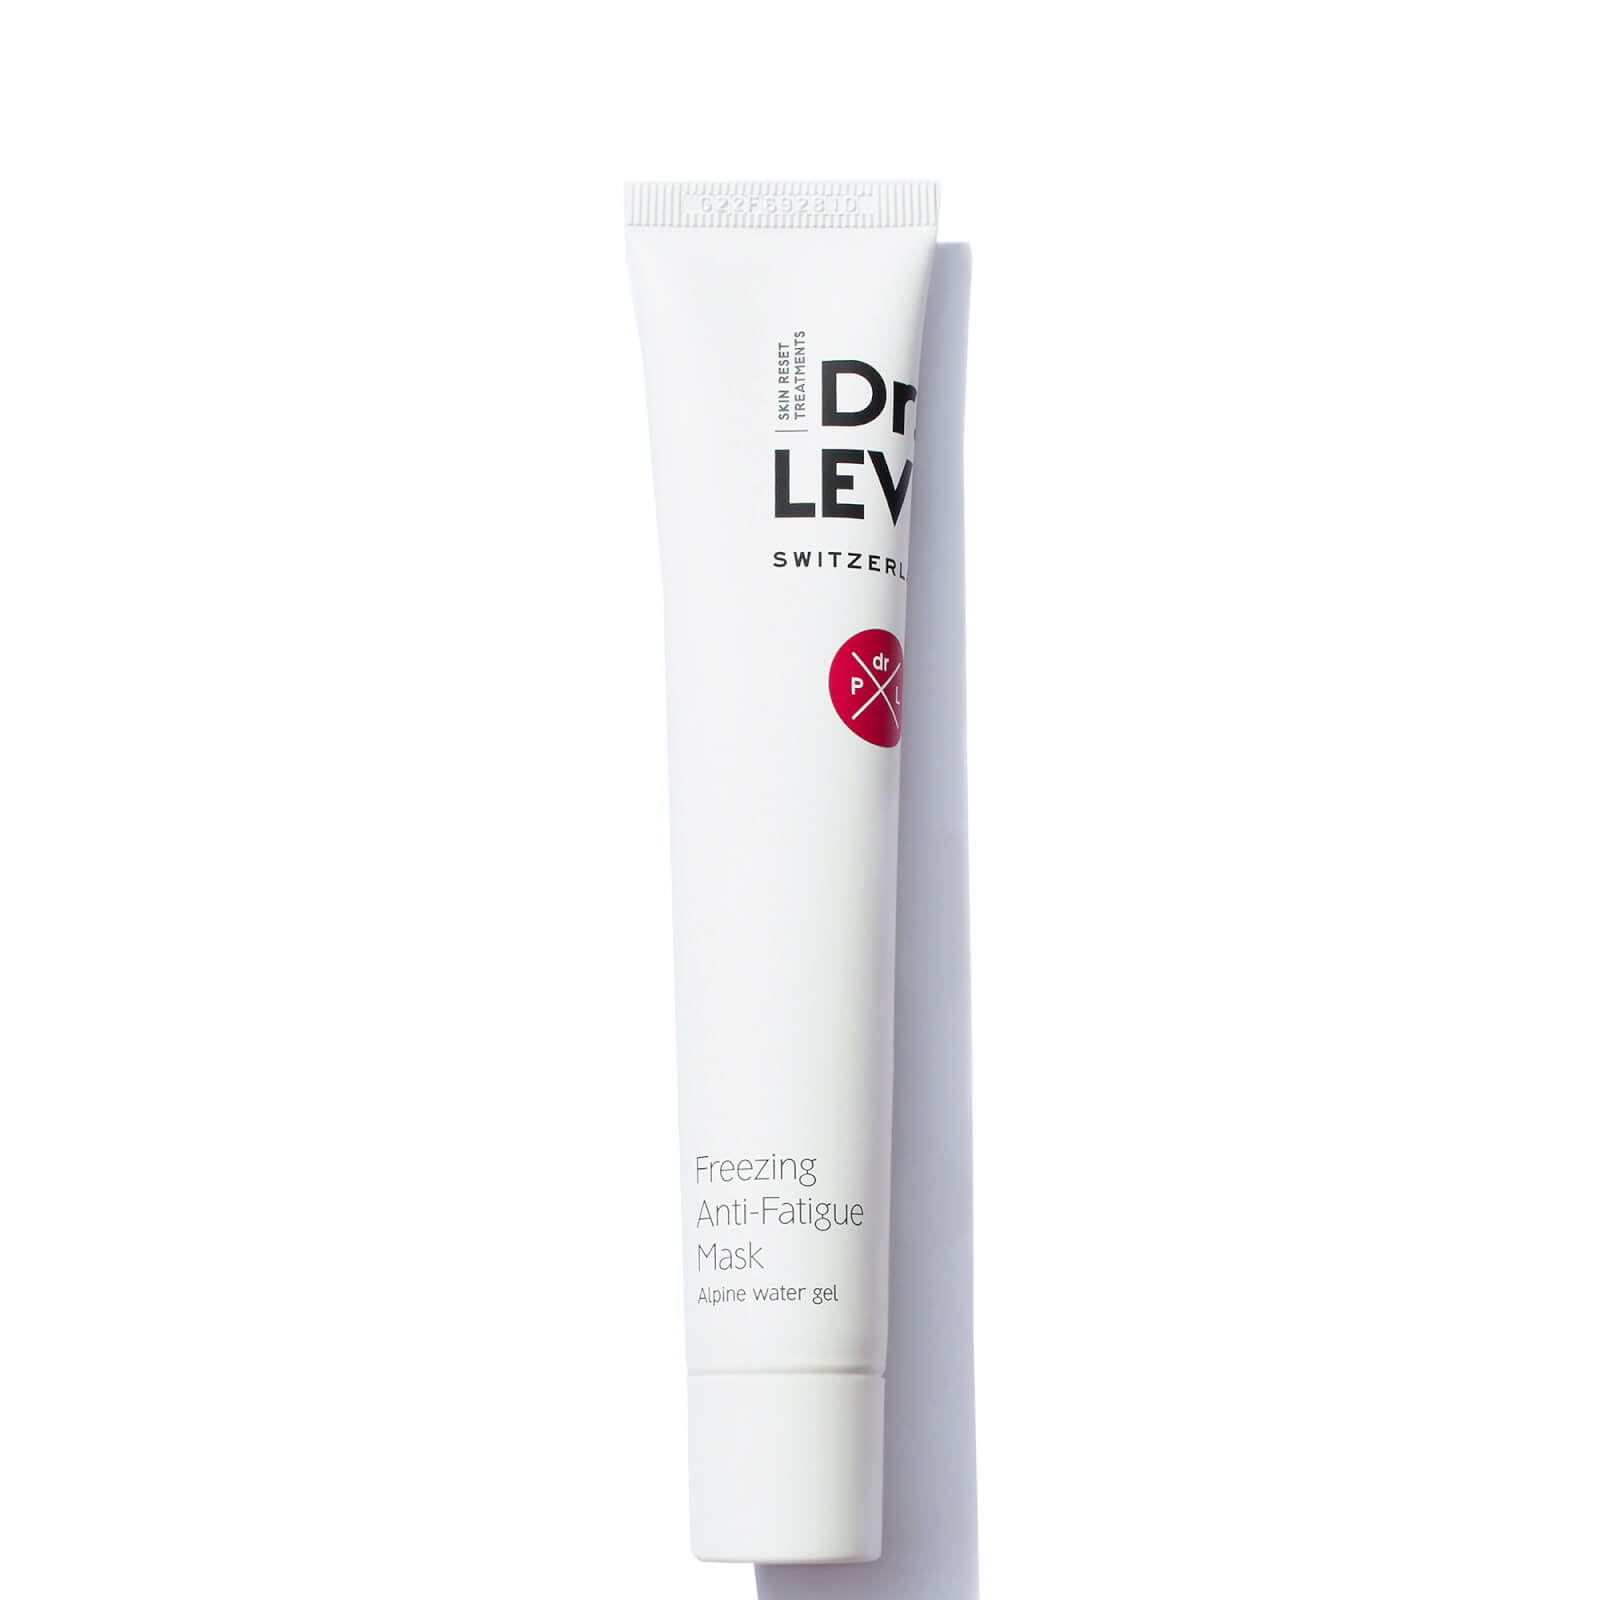 Dr. Levy Switzerland Freezing Anti-fatigue Mask 50ml In White